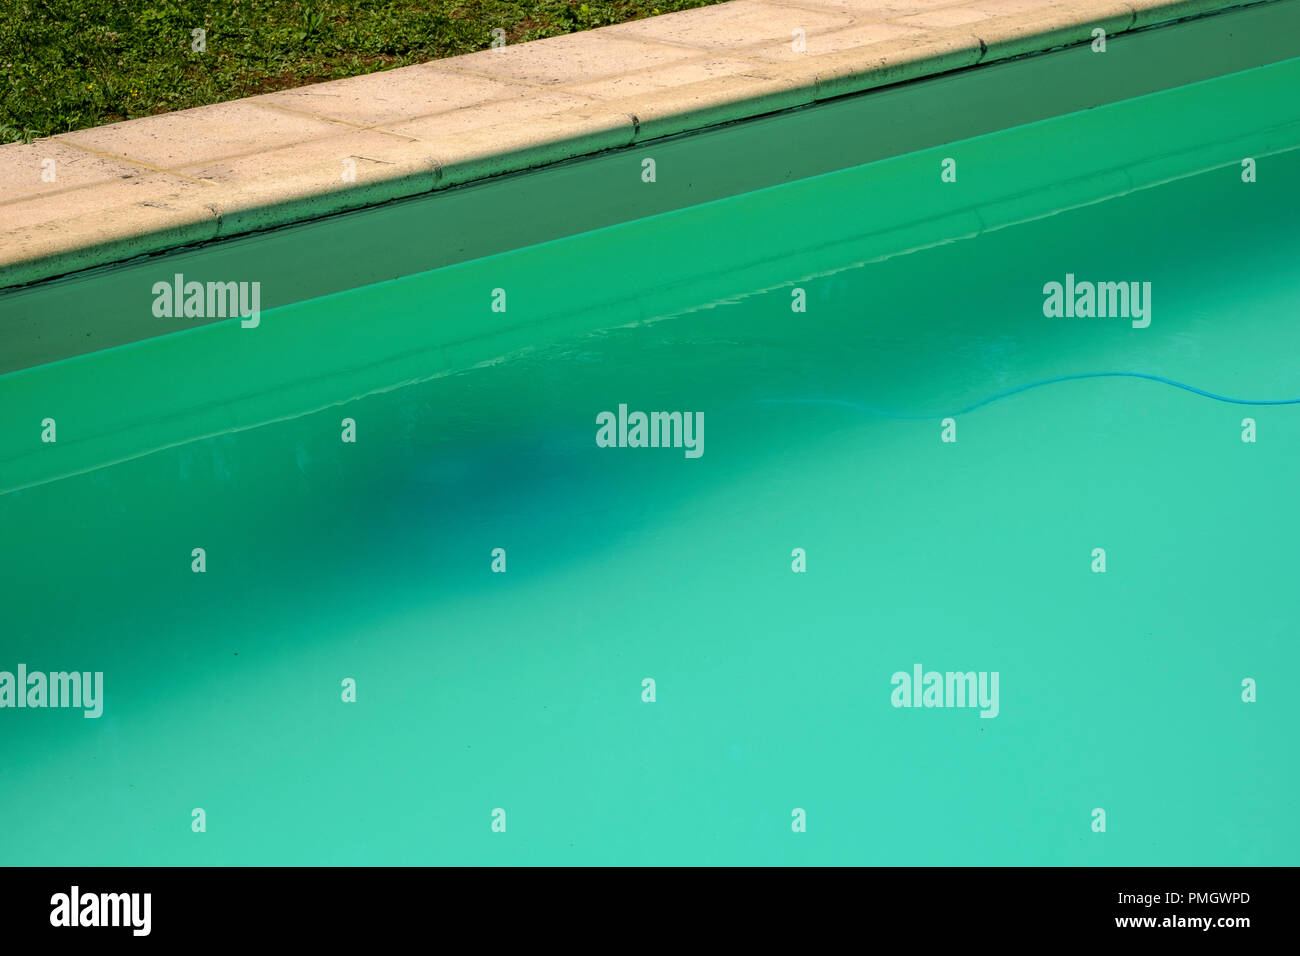 Swimming pool maintenance - An automatic robot pool cleaner can just be seen on the bottom of a cloudy swimming pool removing debris and algae. Stock Photo